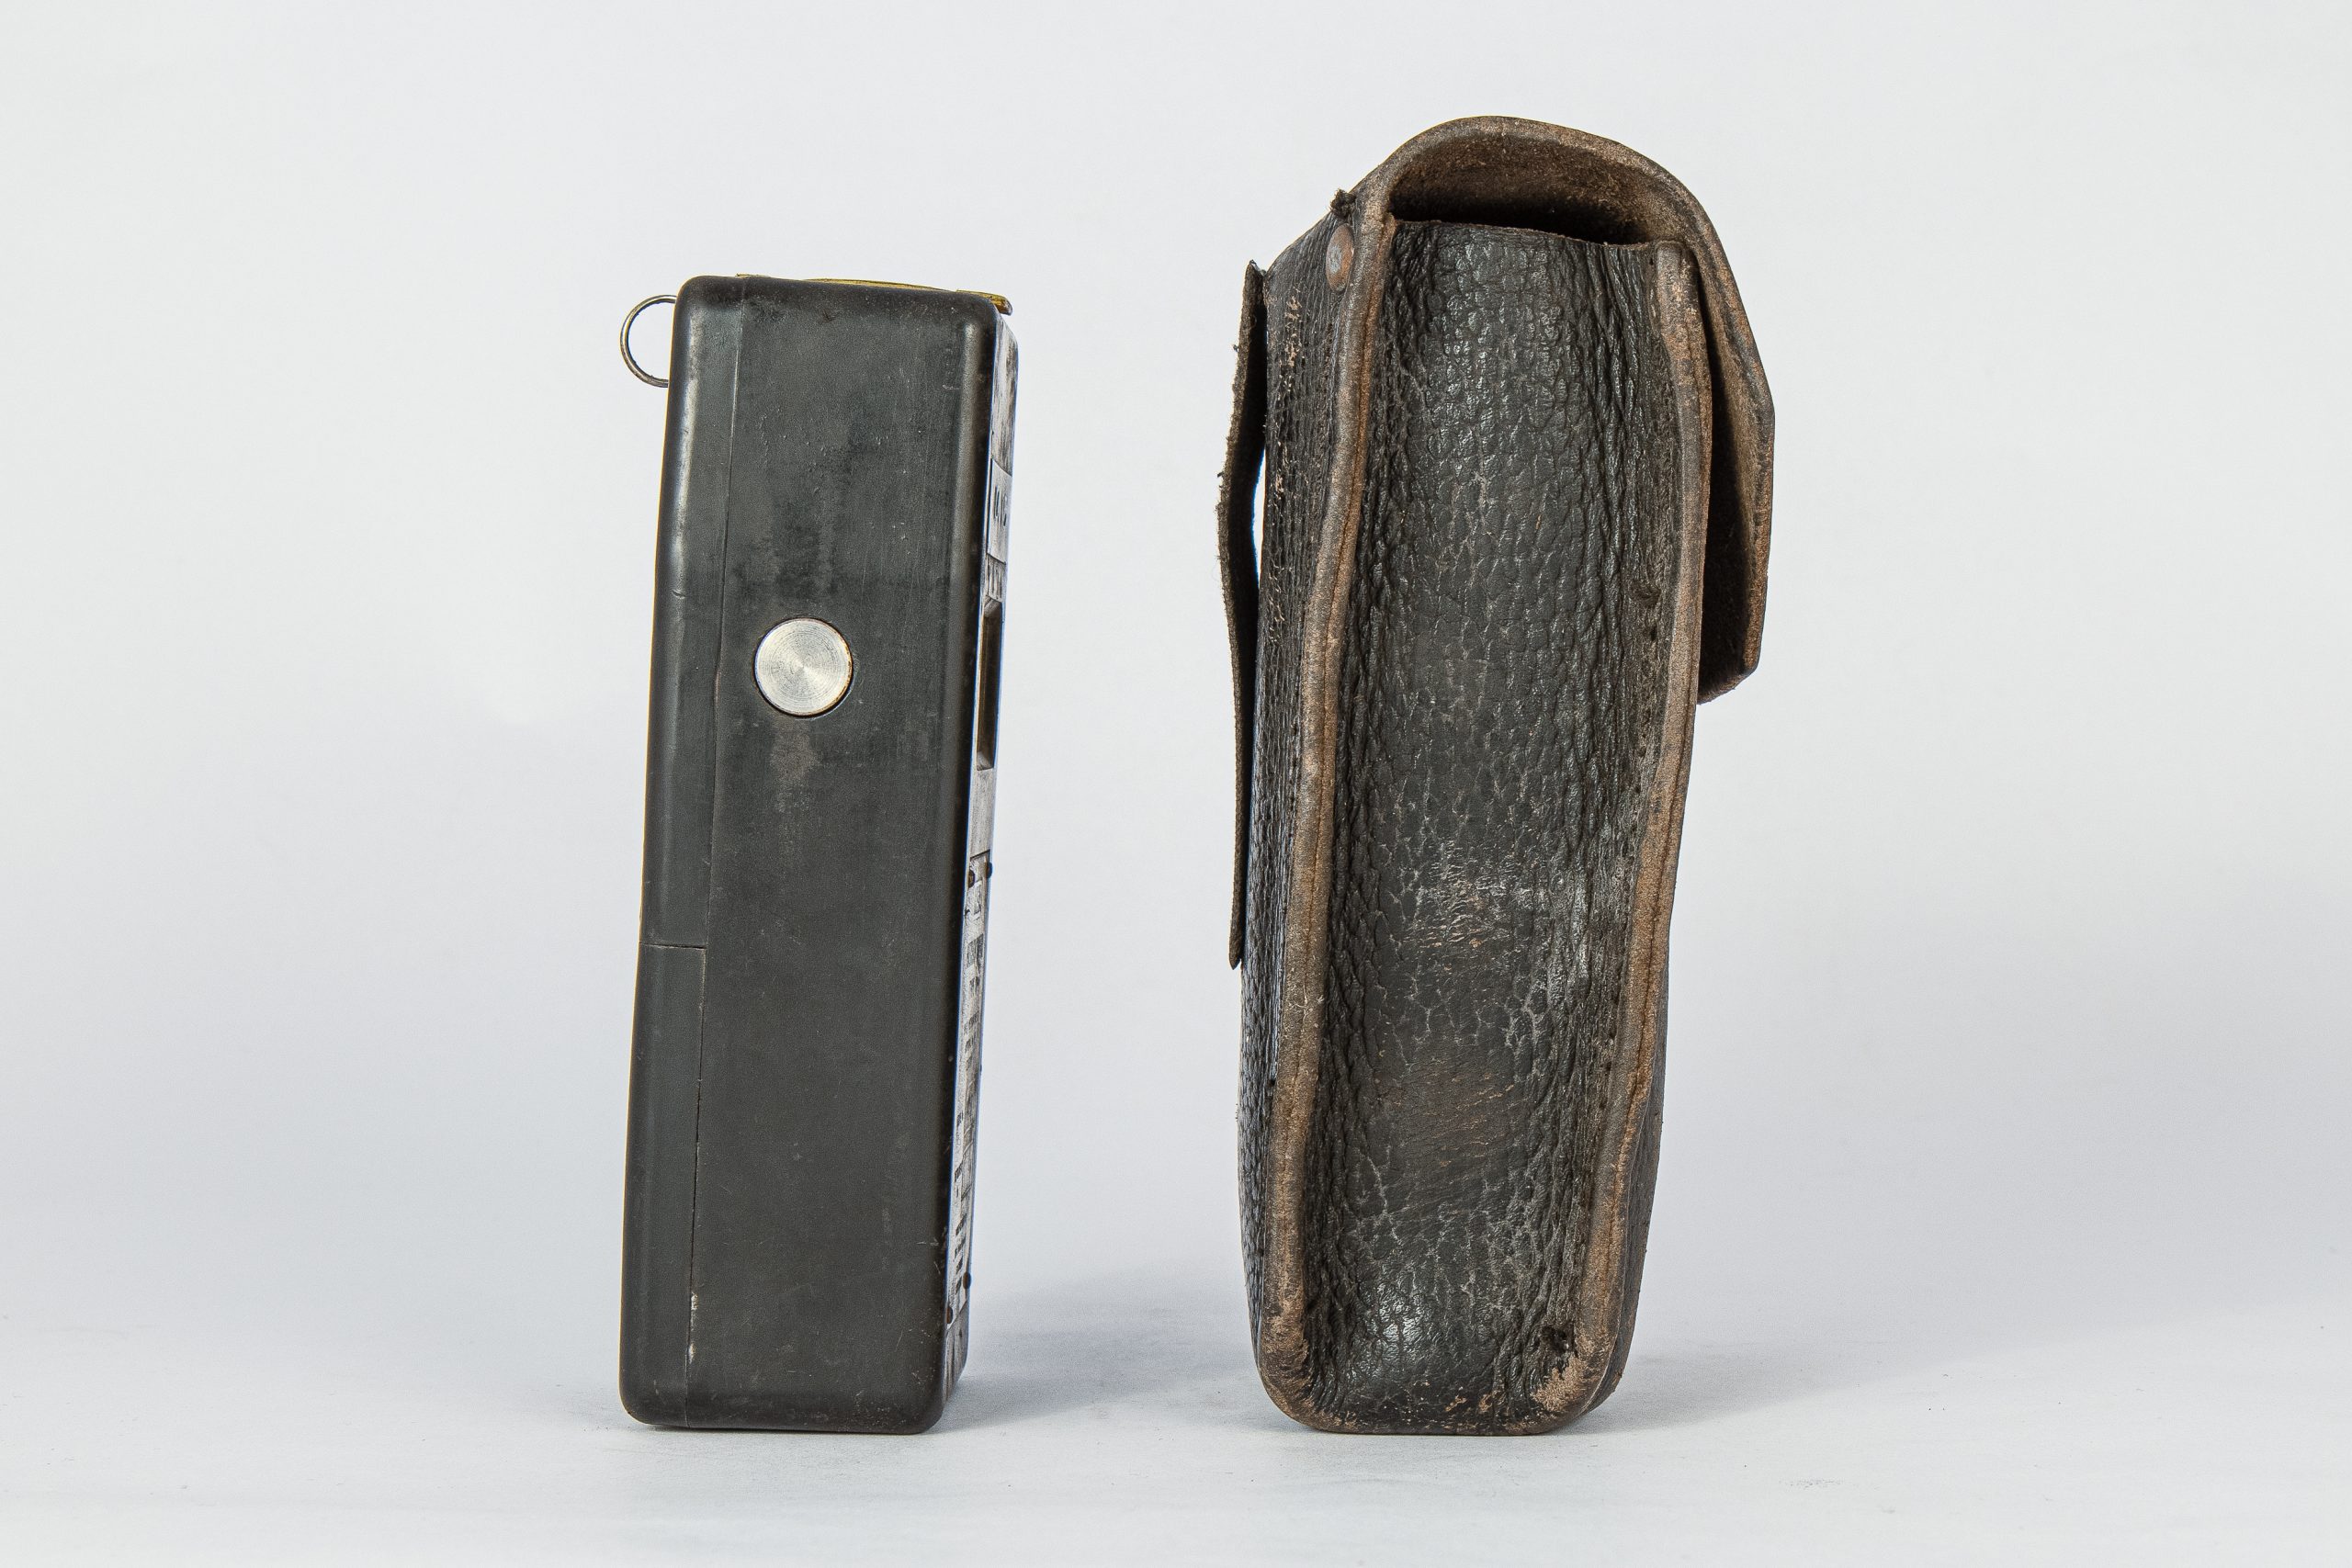 Side of device shaped like an old Nokia mobile phone. Beside it is a leather pouch to hold the device.